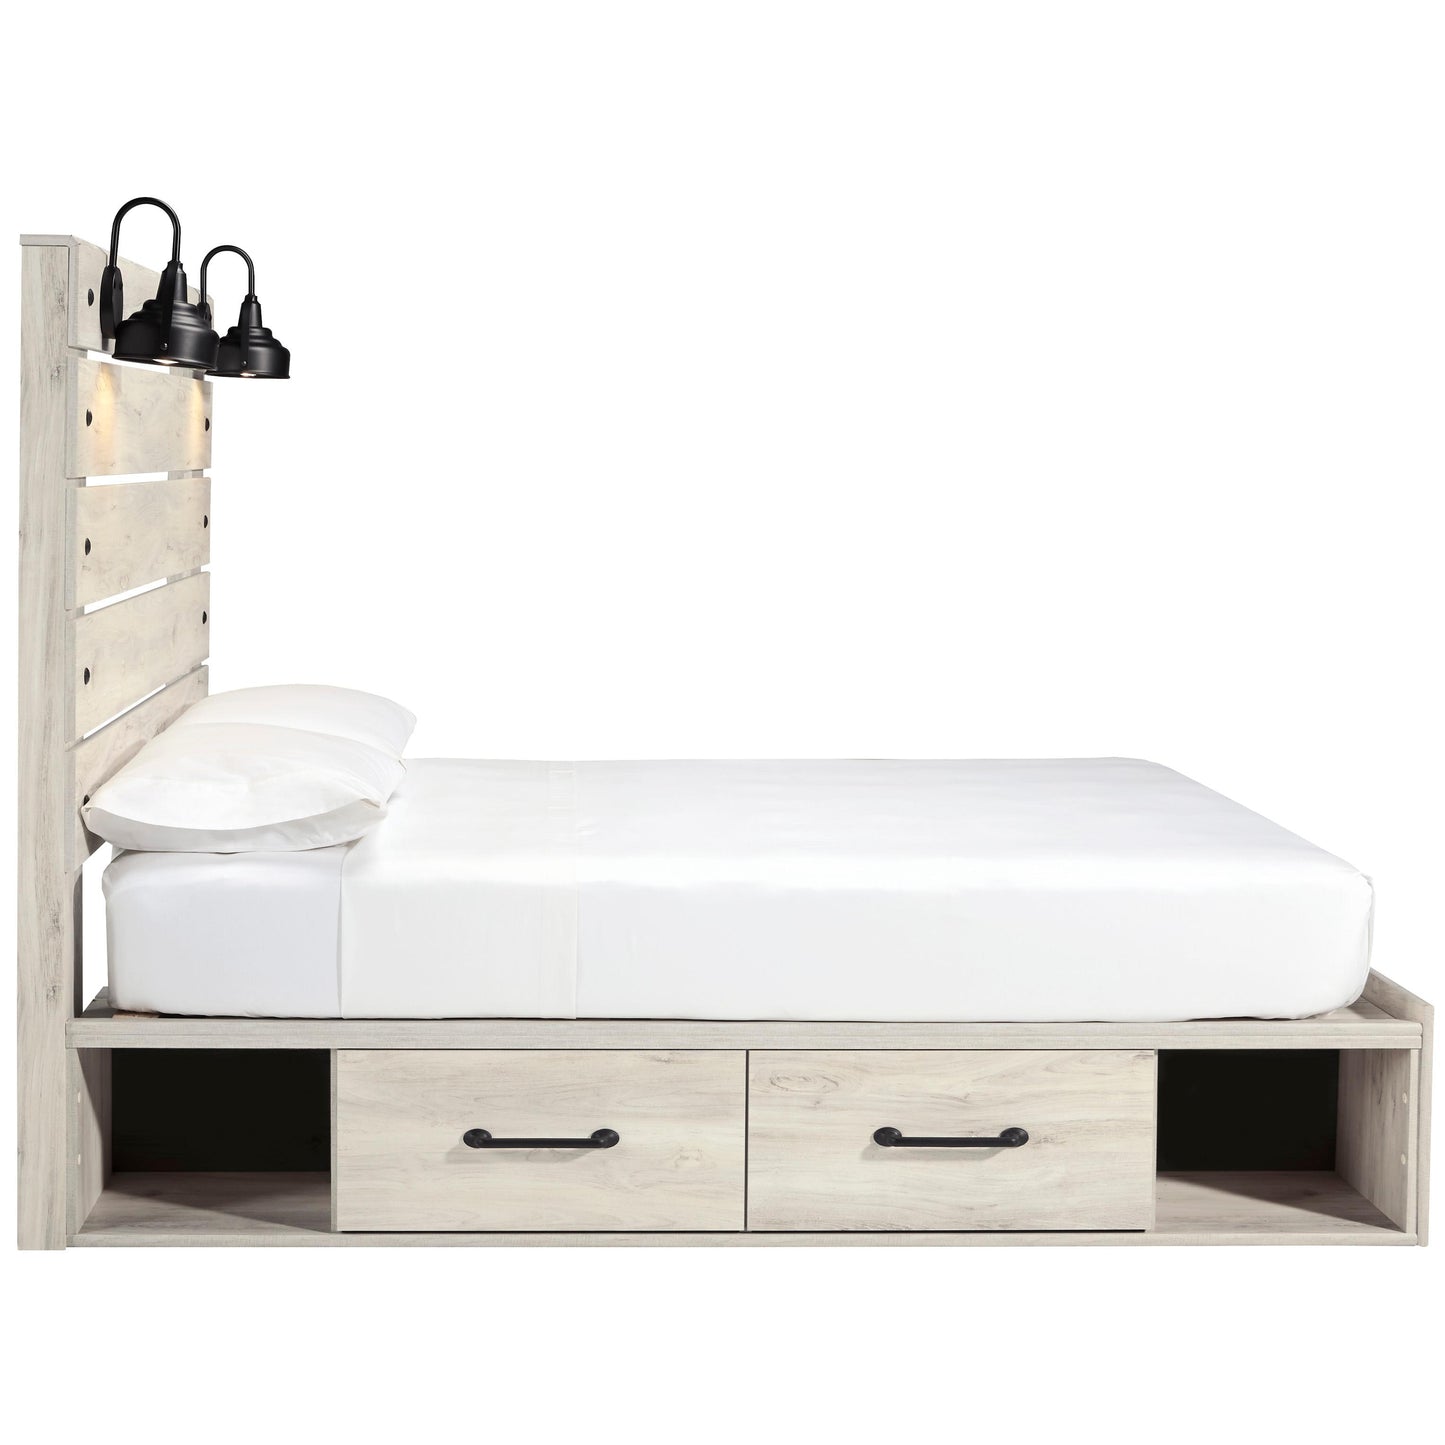 Signature Design by Ashley Cambeck Queen Panel Bed with Storage B192-57/B192-54/B192-160/B100-13